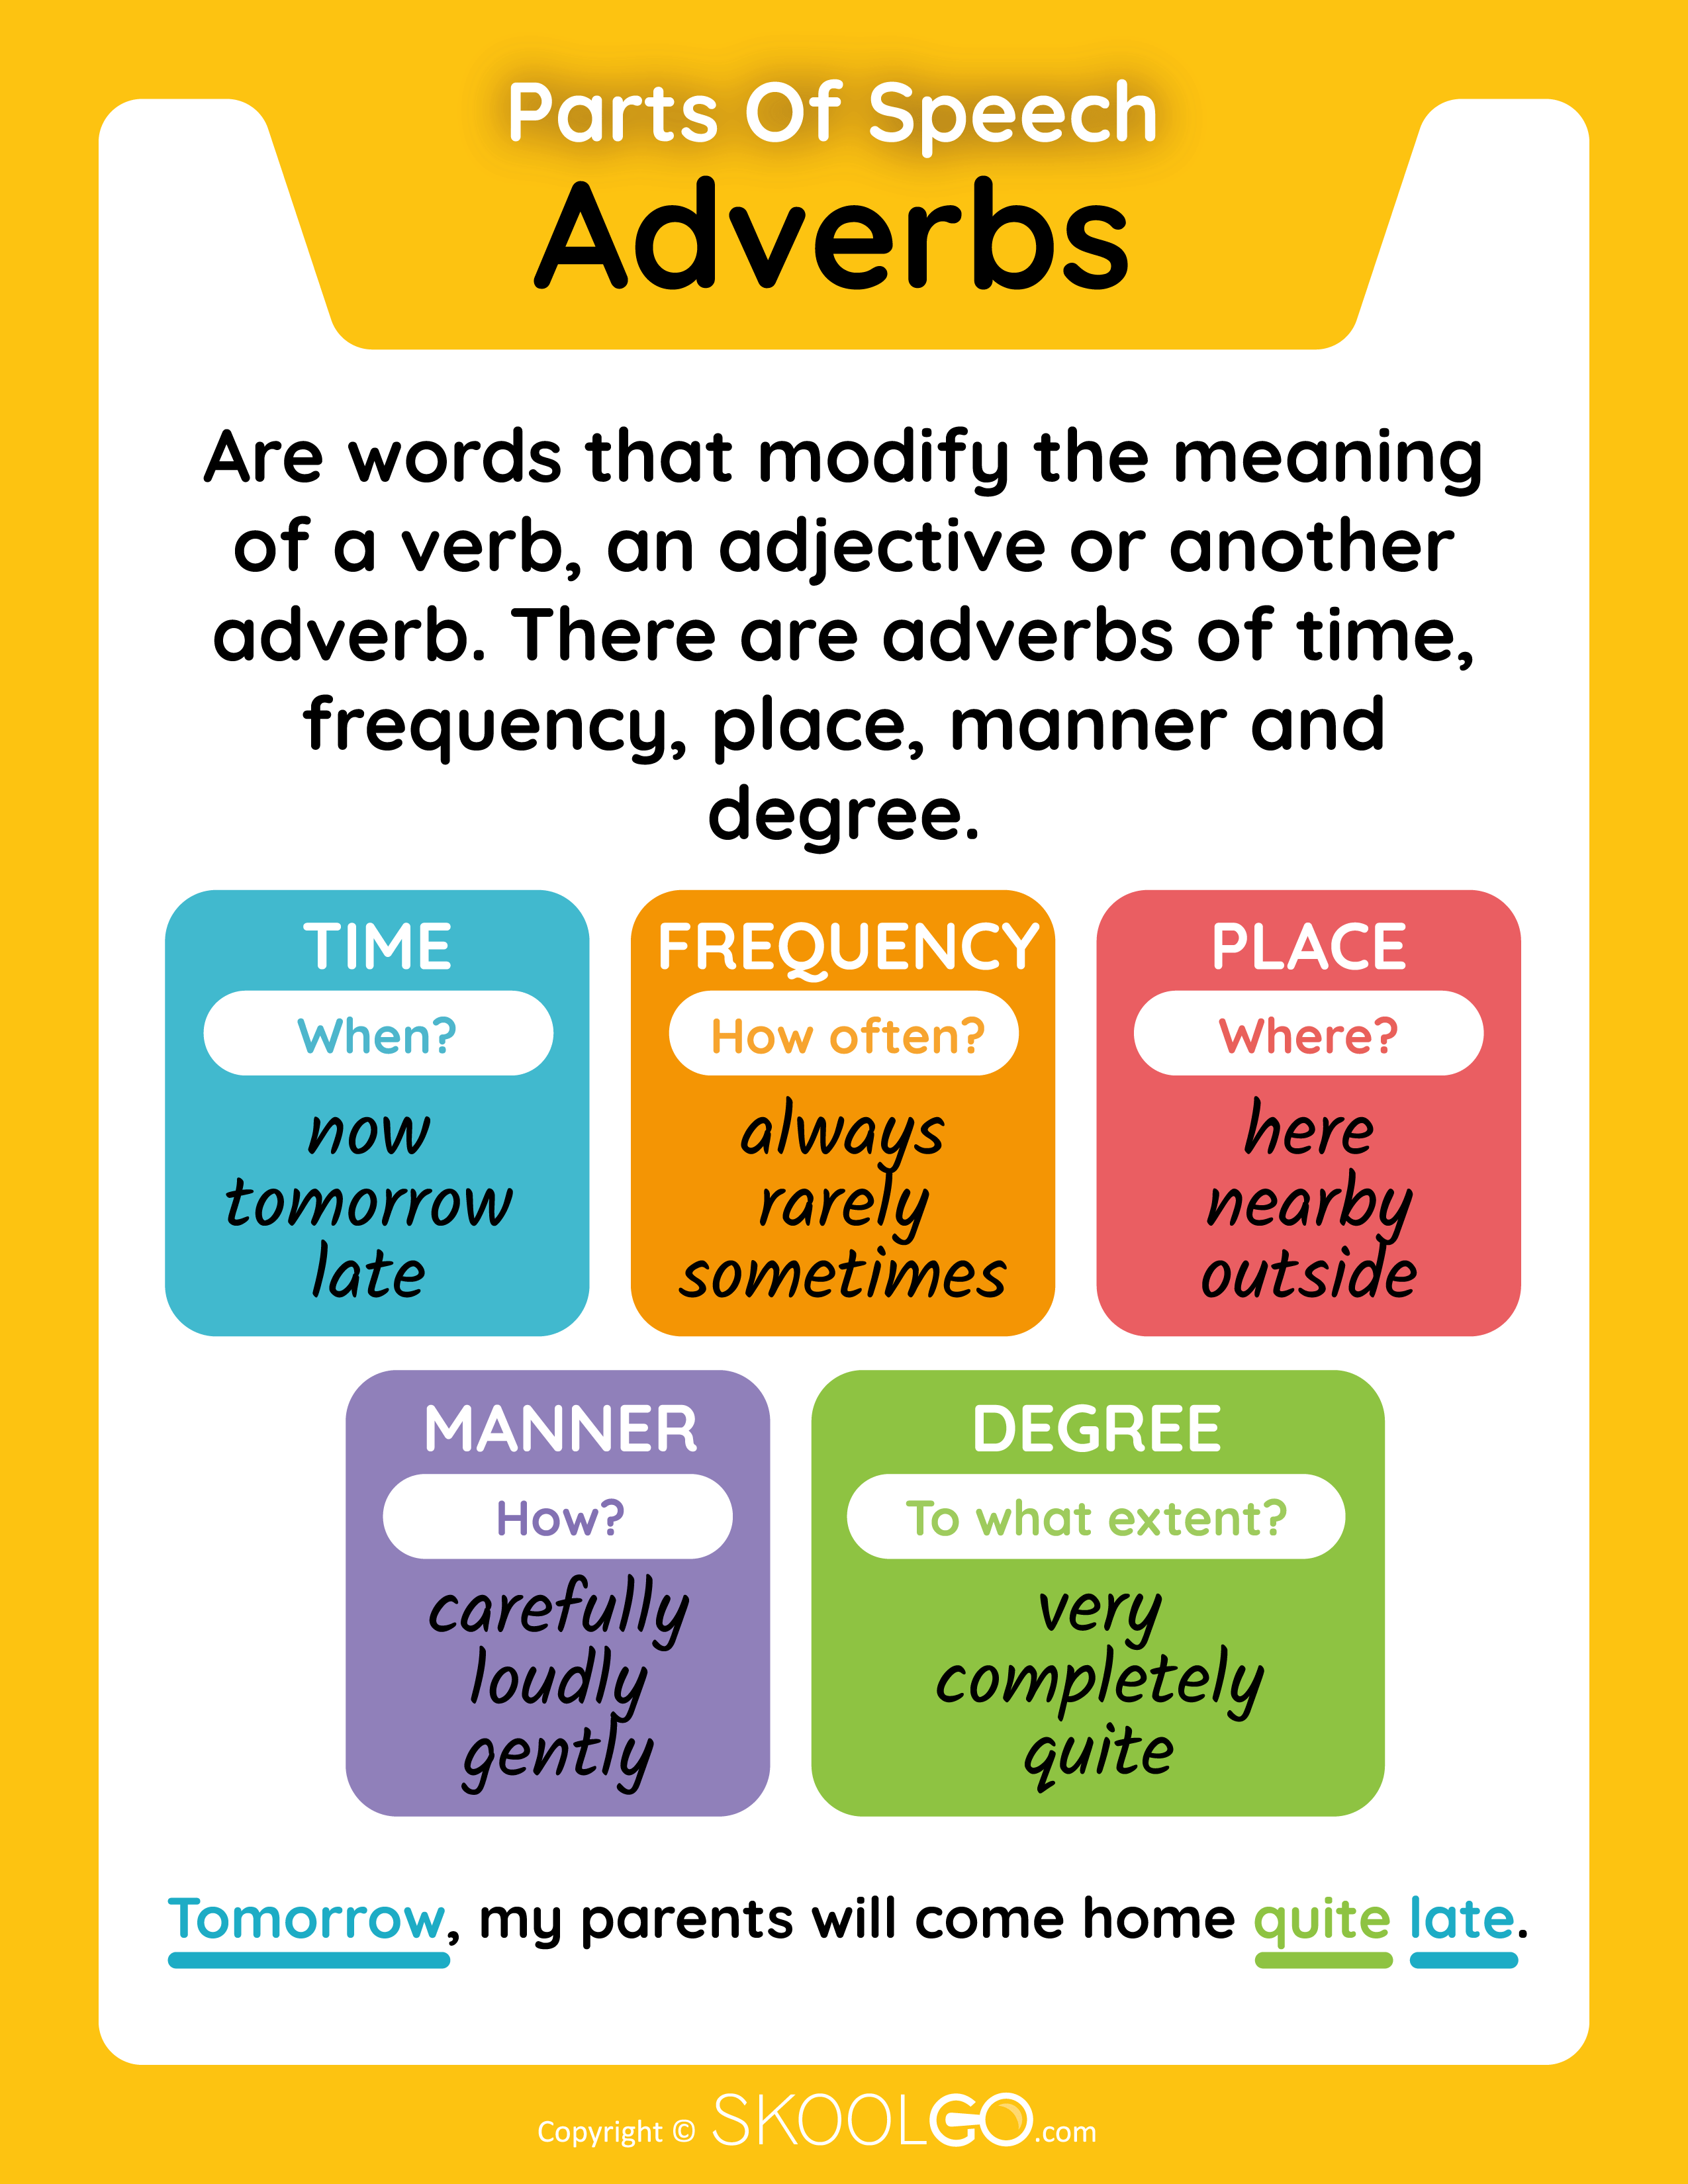 Adverbs - Parts Of Speech - Free Classroom Poster